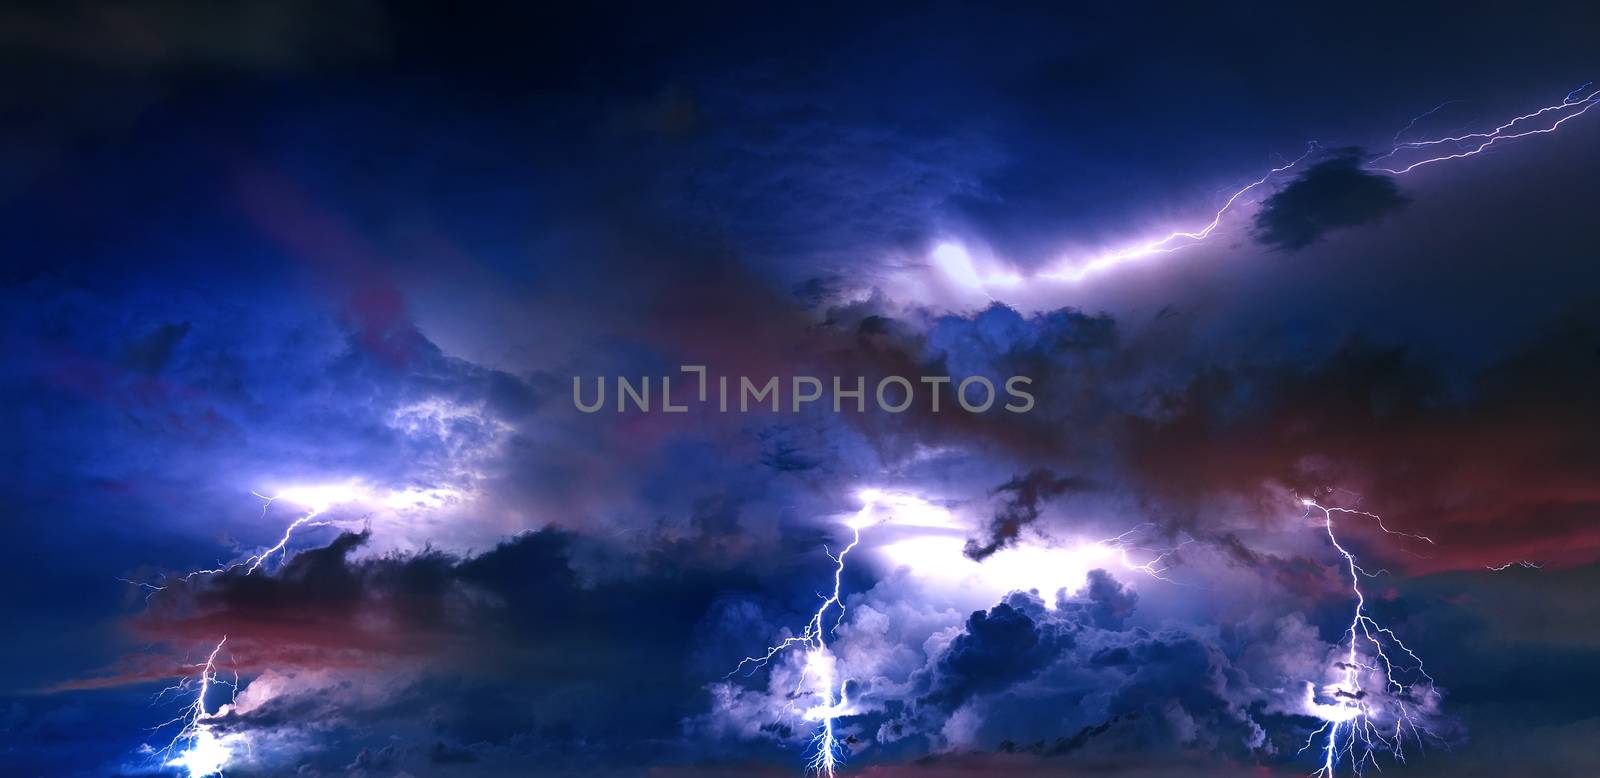 Thunderstorm clouds with lightning at night. by gutarphotoghaphy